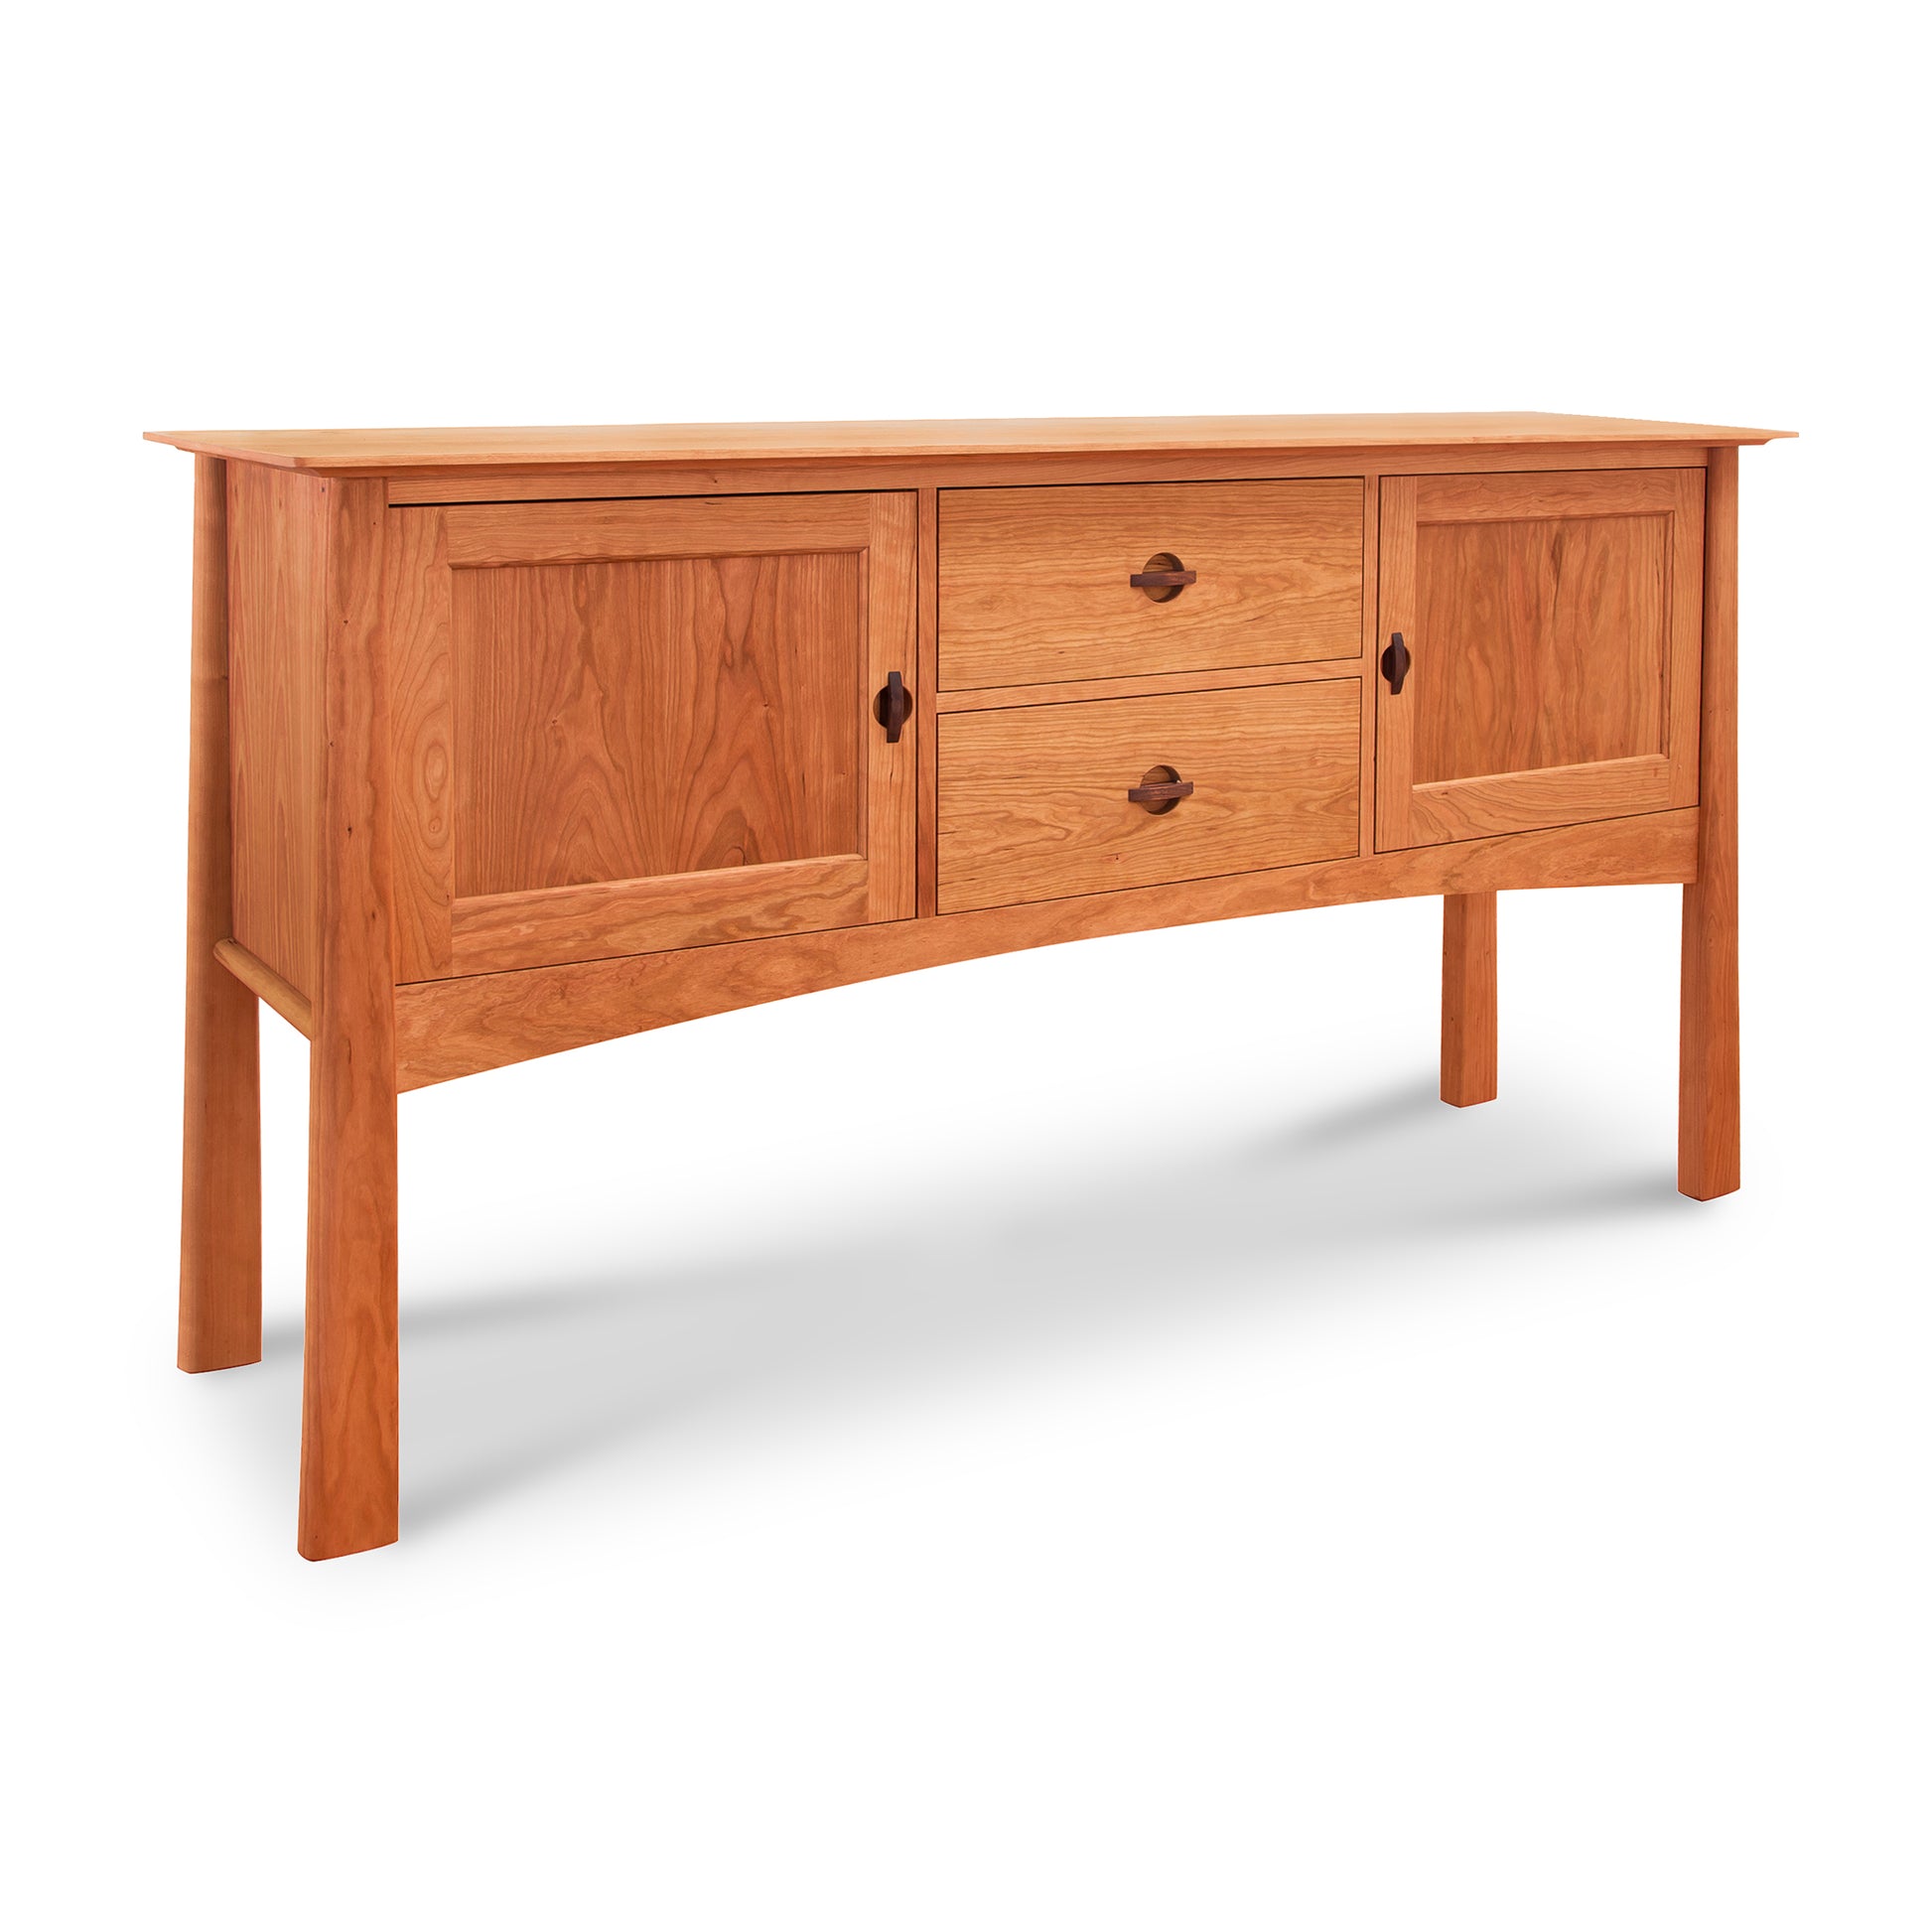 A luxury wooden sideboard from the Cherry Moon Furniture Collection, perfect for a dining room. This versatile Cherry Moon Hunt Board from Maple Corner Woodworks features two drawers and two doors, providing ample storage space while adding elegance to your space.